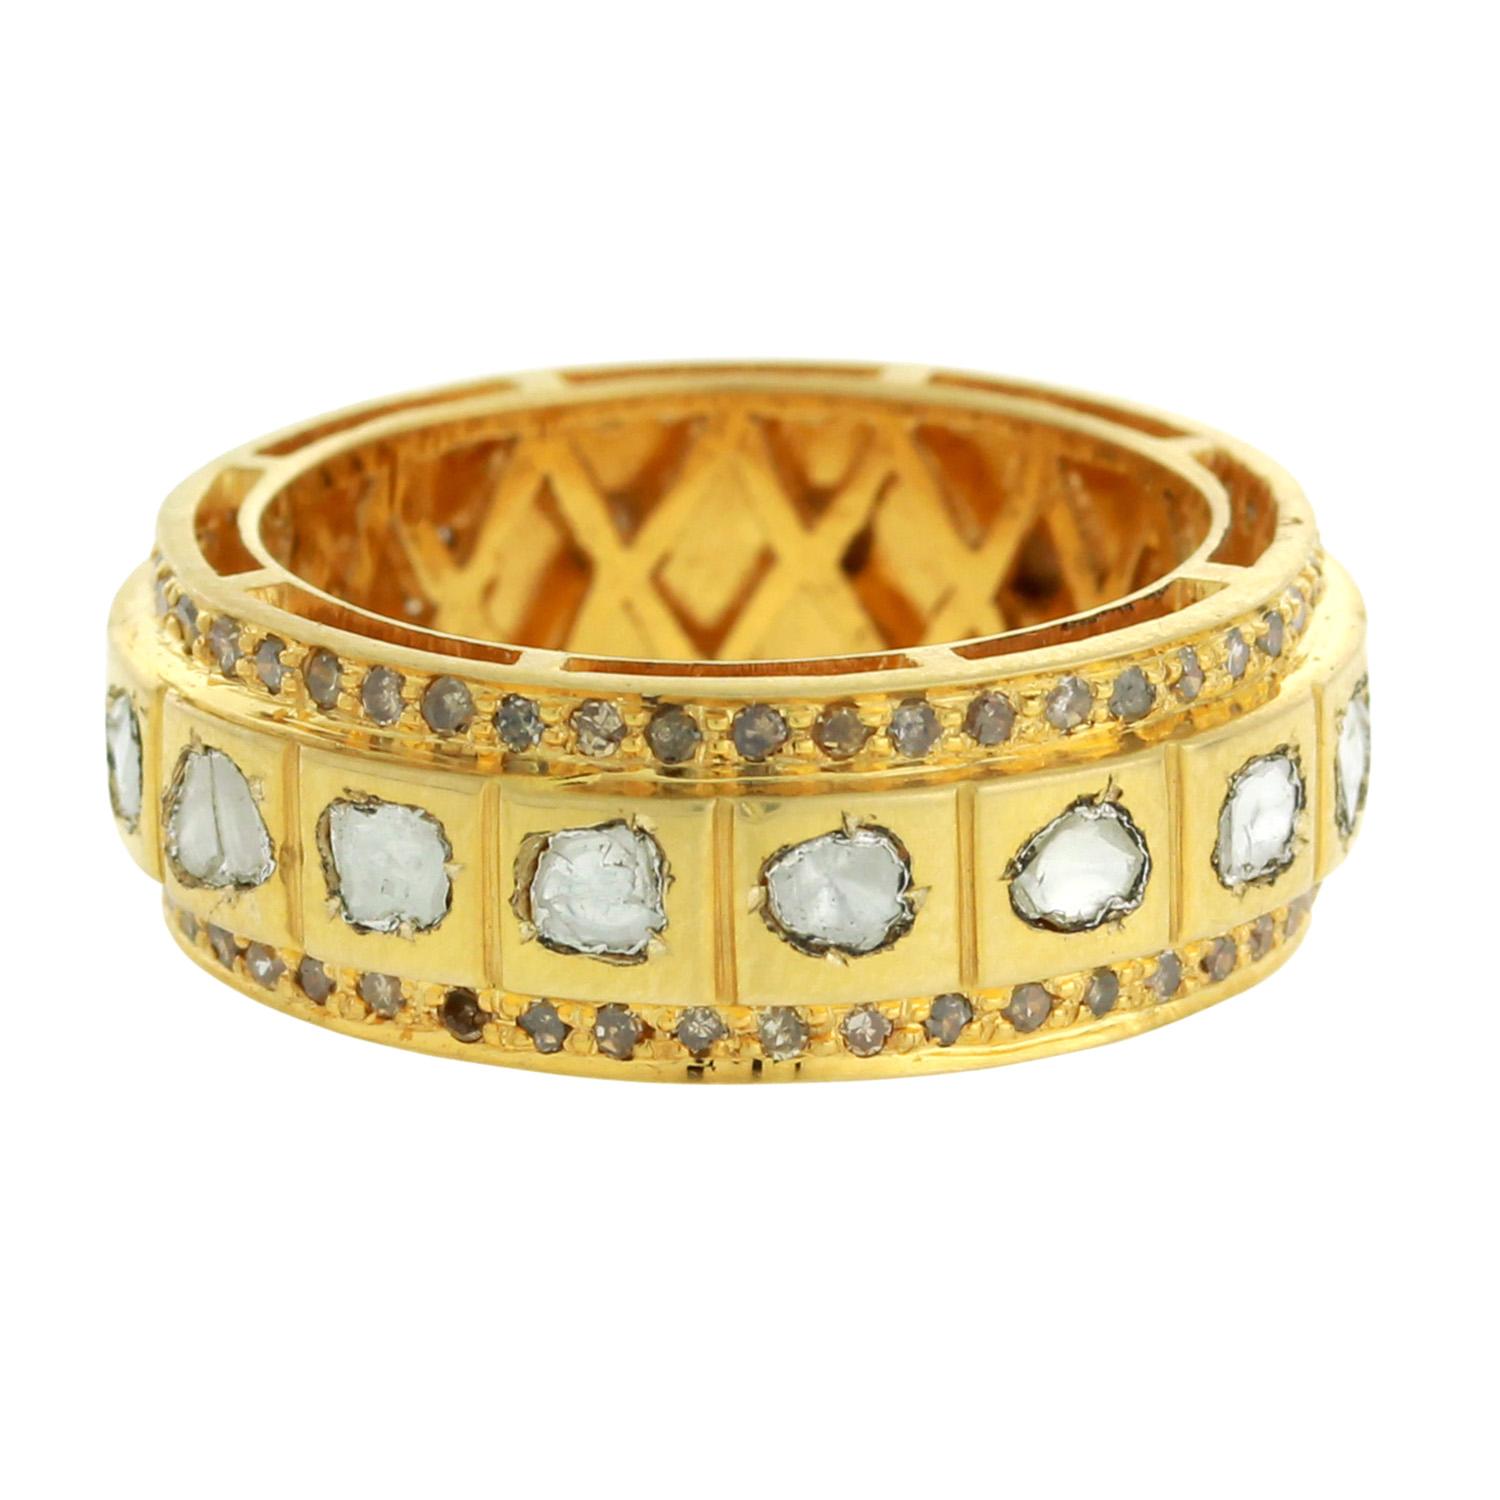 Mixed Cut Rosecut Diamond Band Ring With Filigree Work On Interior Made In 18k Yellow Gold For Sale